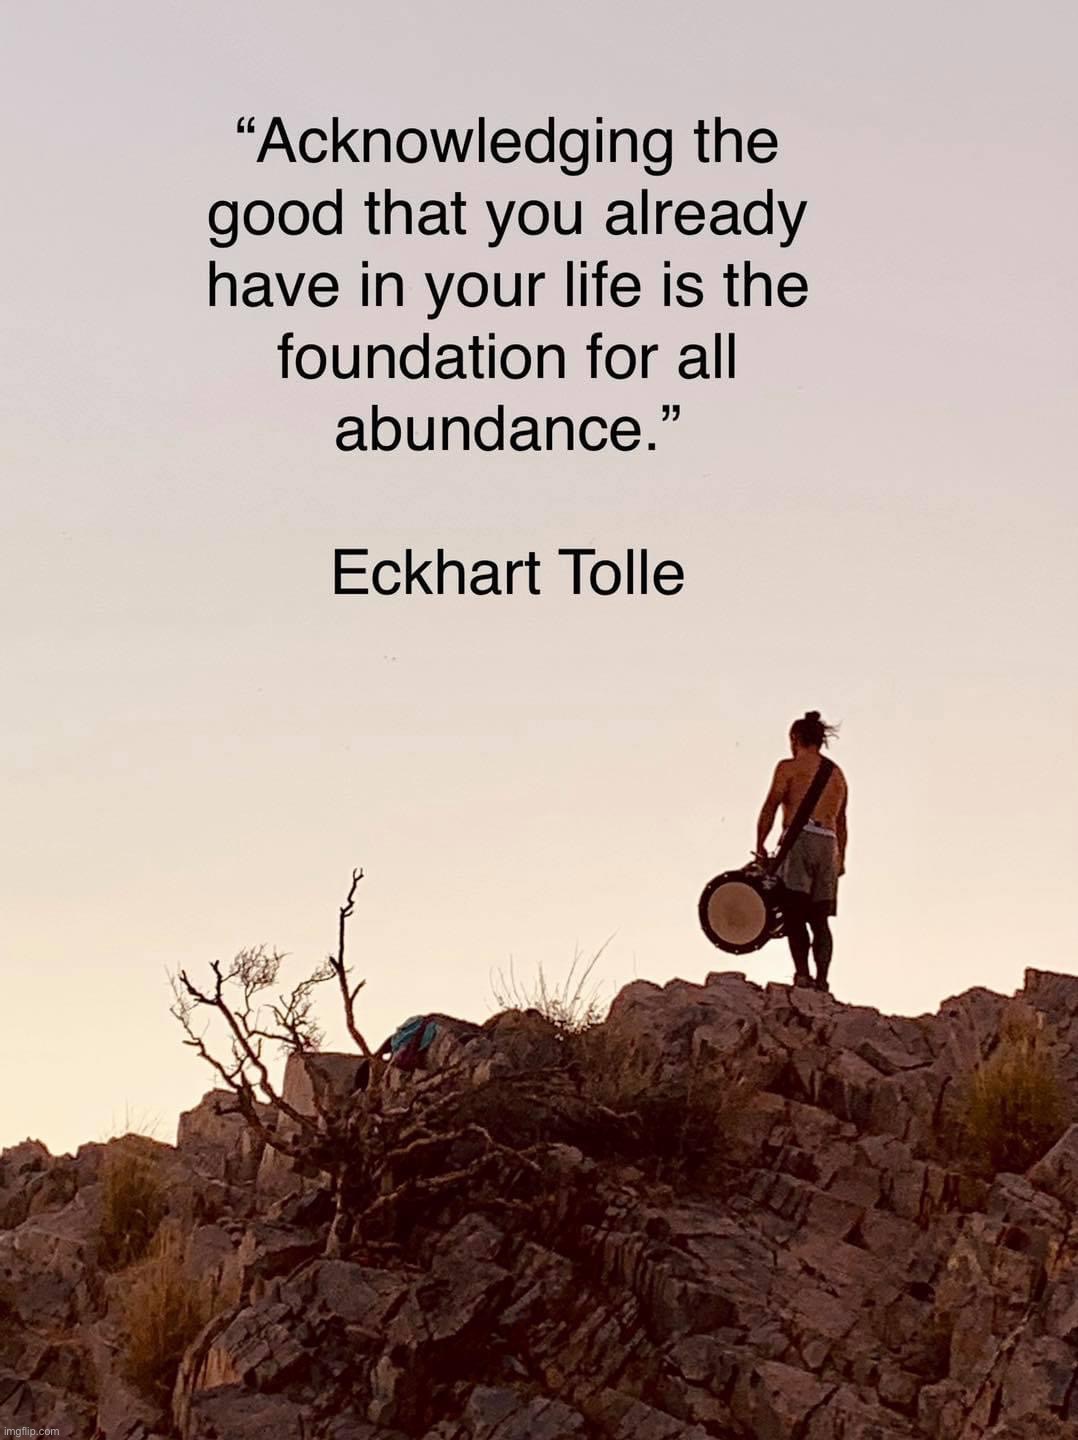 Eckhart Tolle quote | image tagged in eckhart tolle quote | made w/ Imgflip meme maker